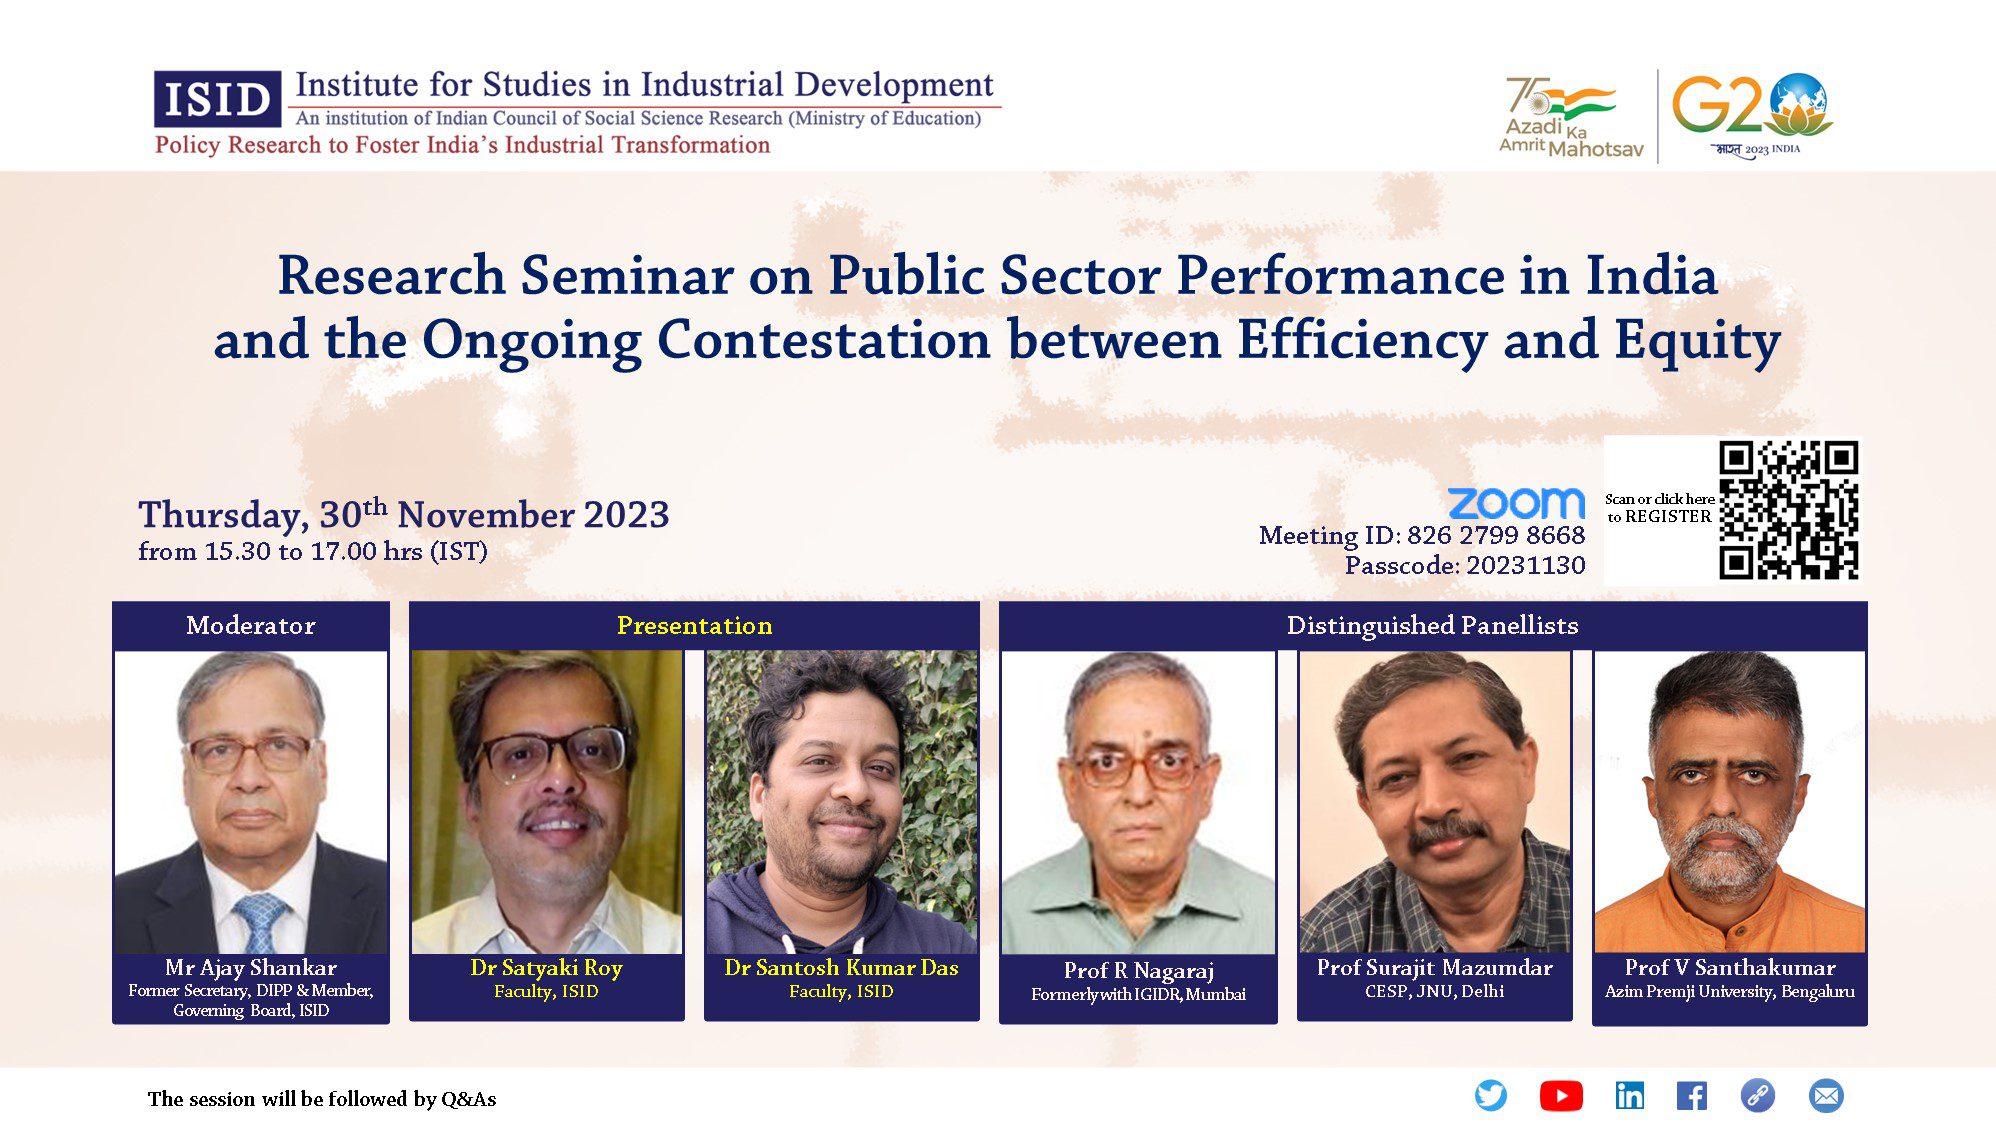 Public Sector Performance in India and the Ongoing Contestation between Efficiency and Equity